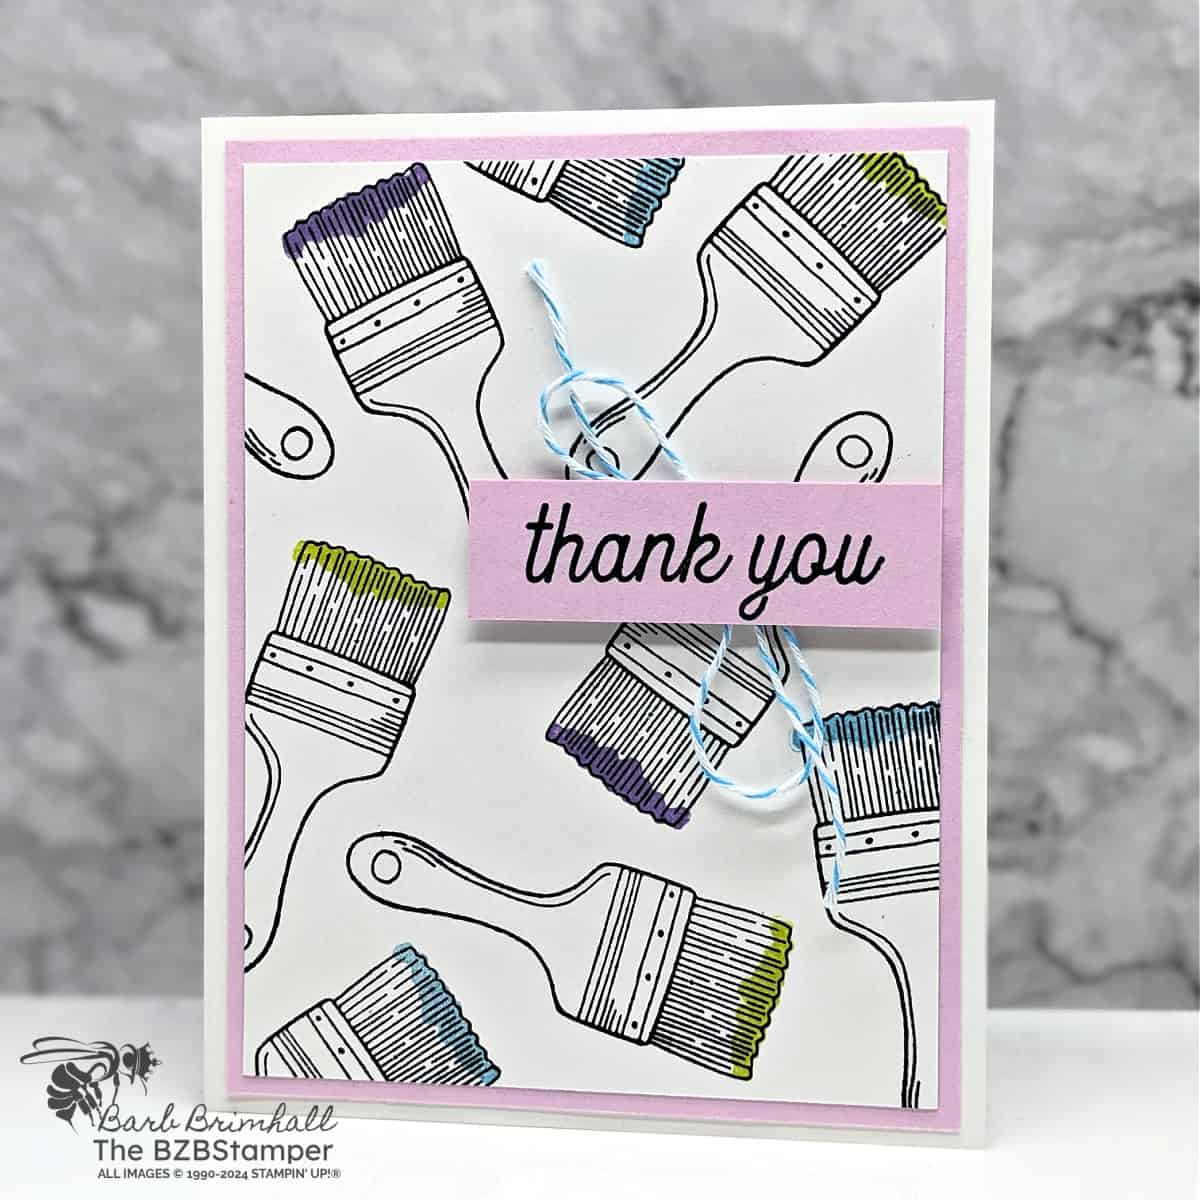 Thank You Card using the Trusty Tools Bundle